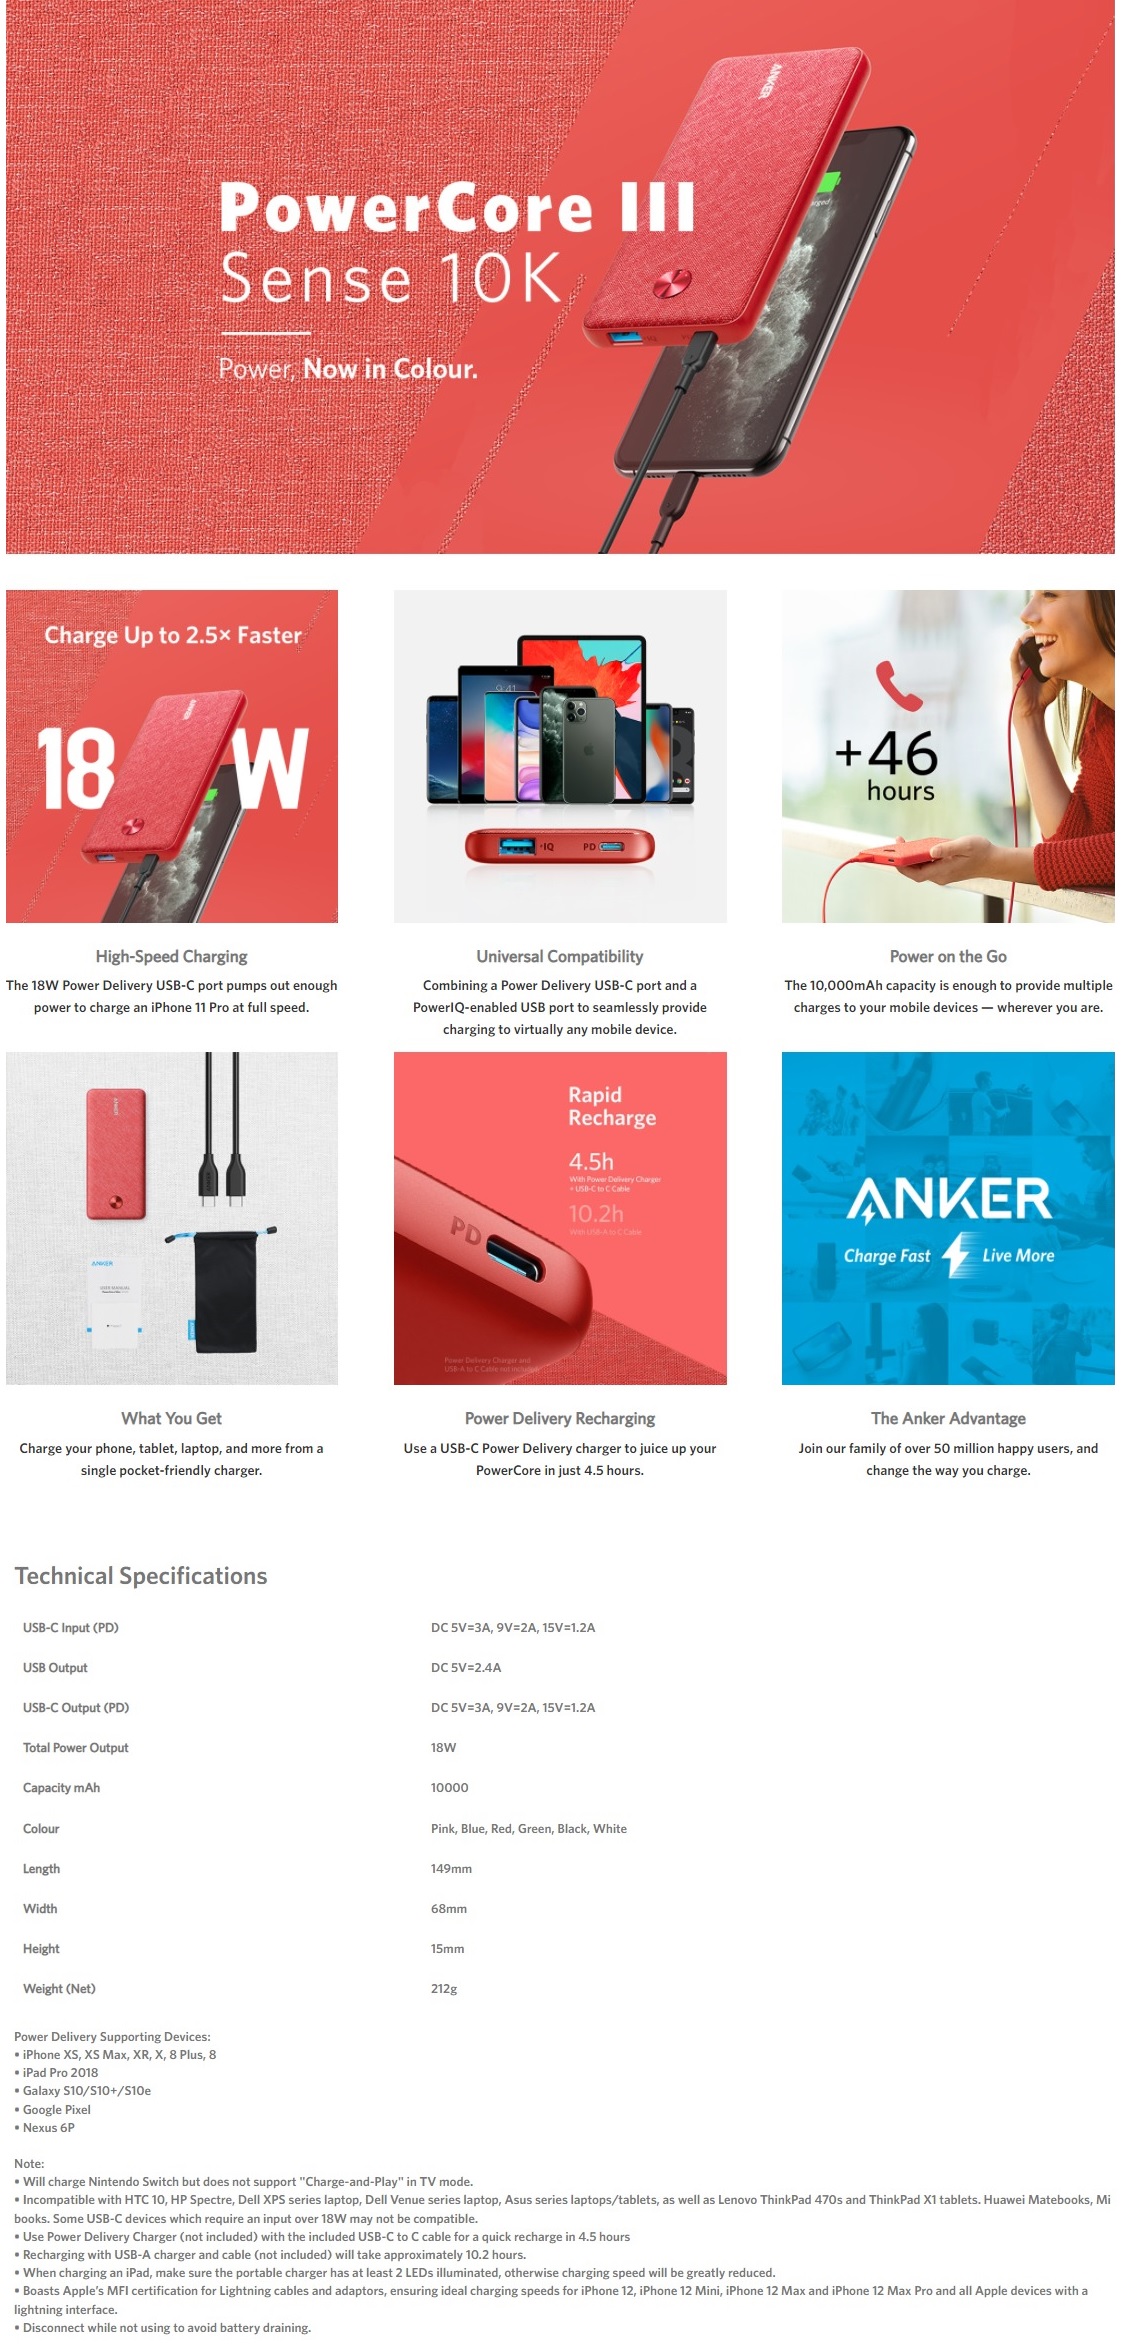 A large marketing image providing additional information about the product ANKER PowerCore III Sense 10K - Green Fabric - Additional alt info not provided